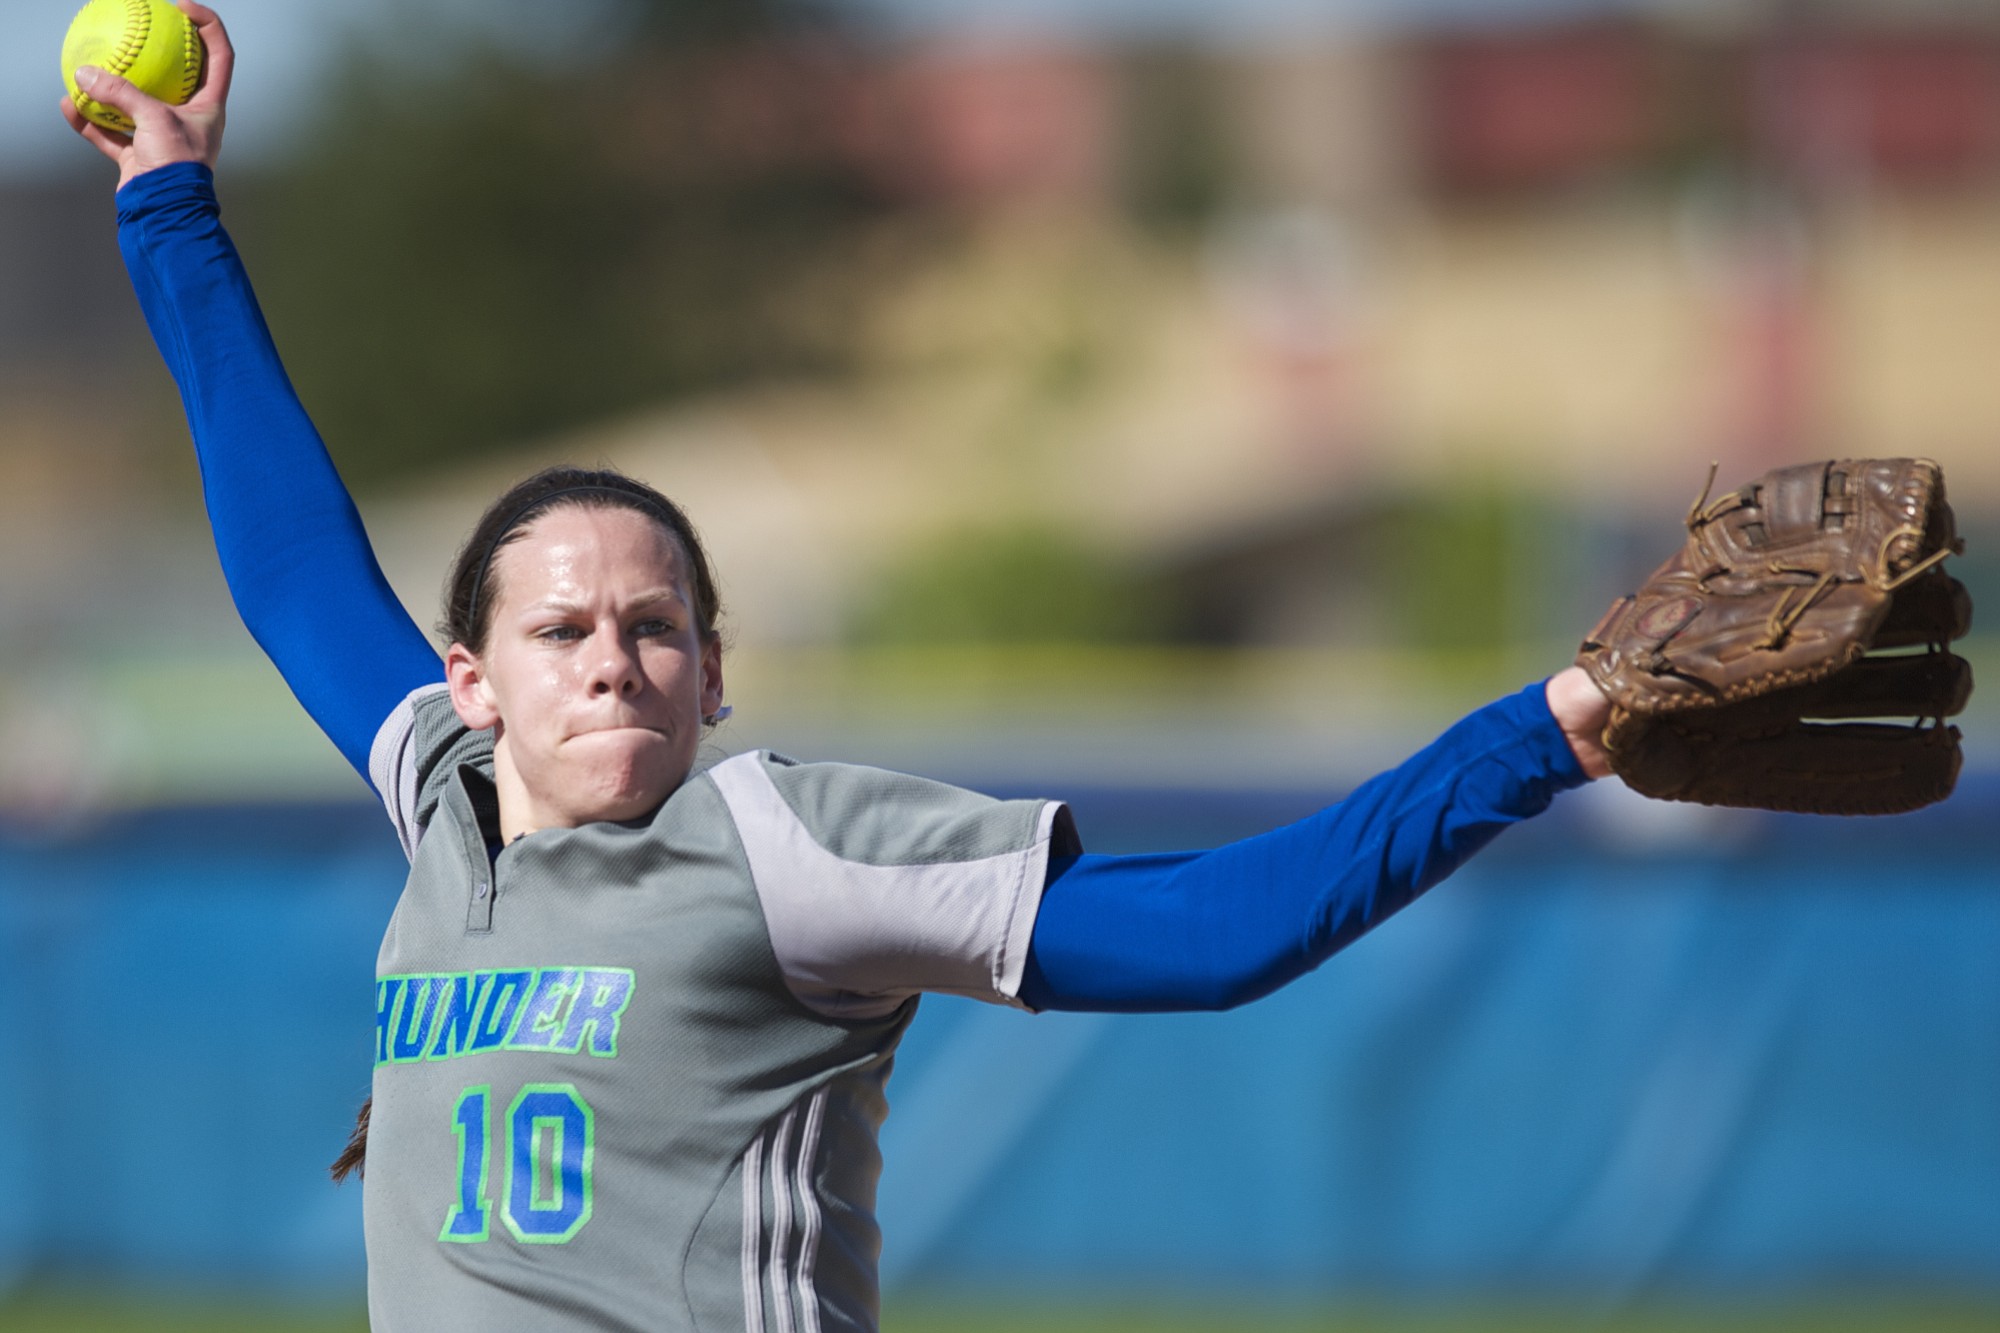 Mountain View pitcher Colleen Driscoll was told she wouldn't play softball her senior year.